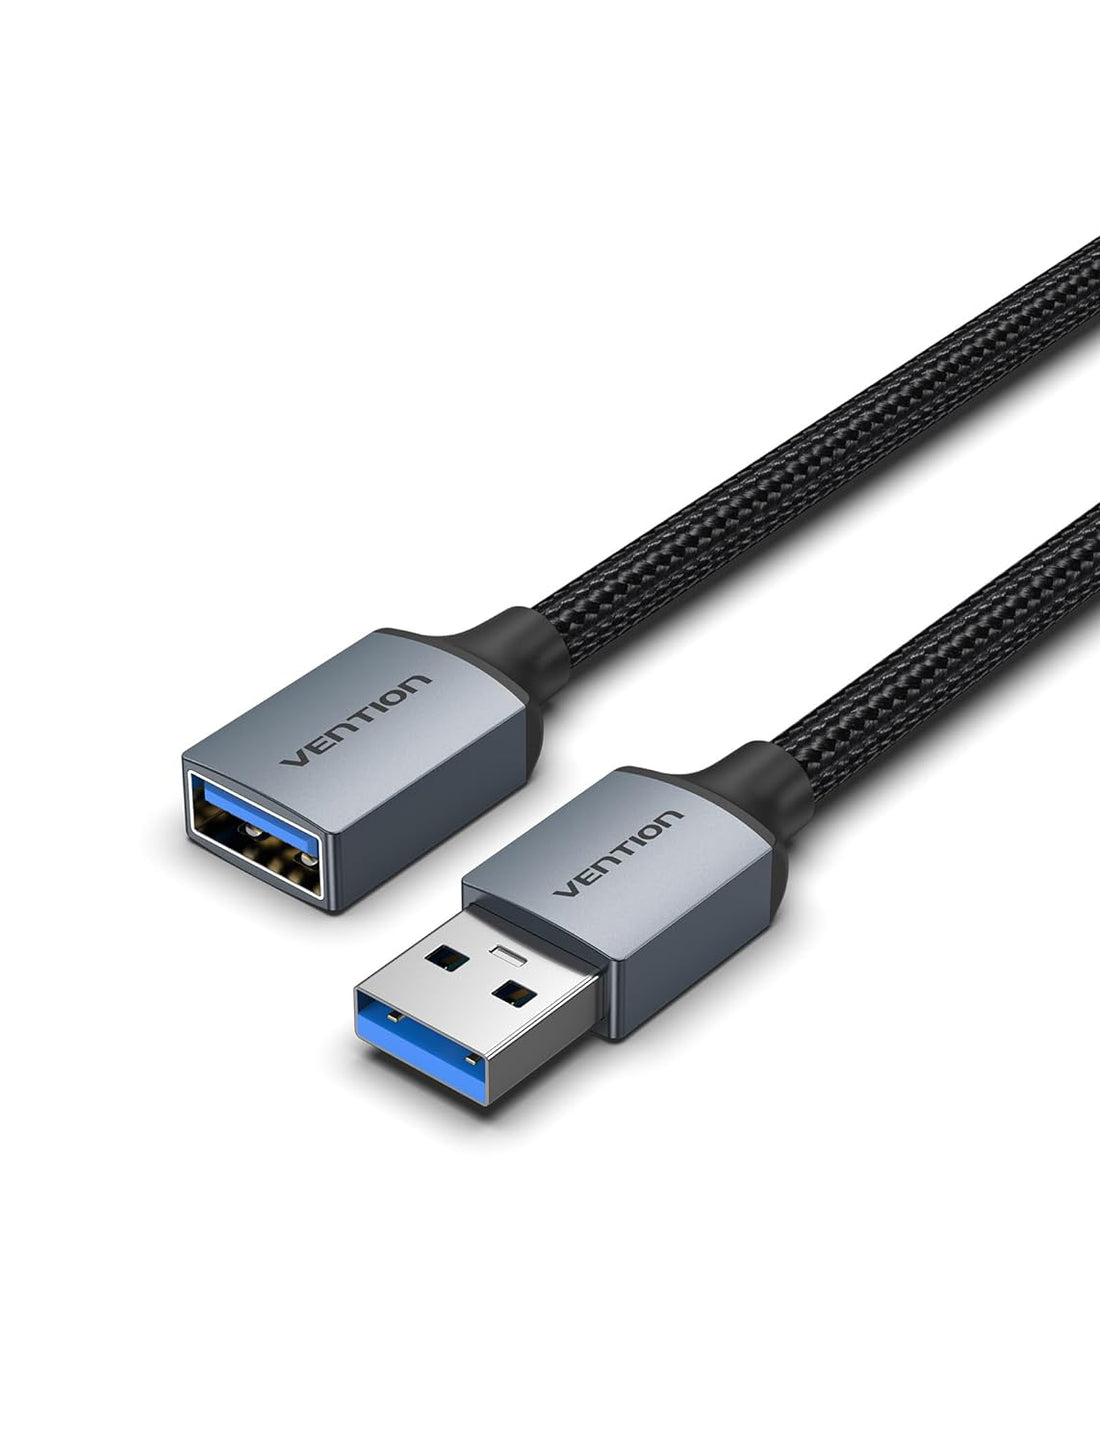 VENTION USB Extension Cable 6.6FT - USB Extender USB 3.0 Extension Cable Male to Female Cord Nylon Braided High Data Transfer for Webcam Camera Keyboard Mouse Flash Drive Printer